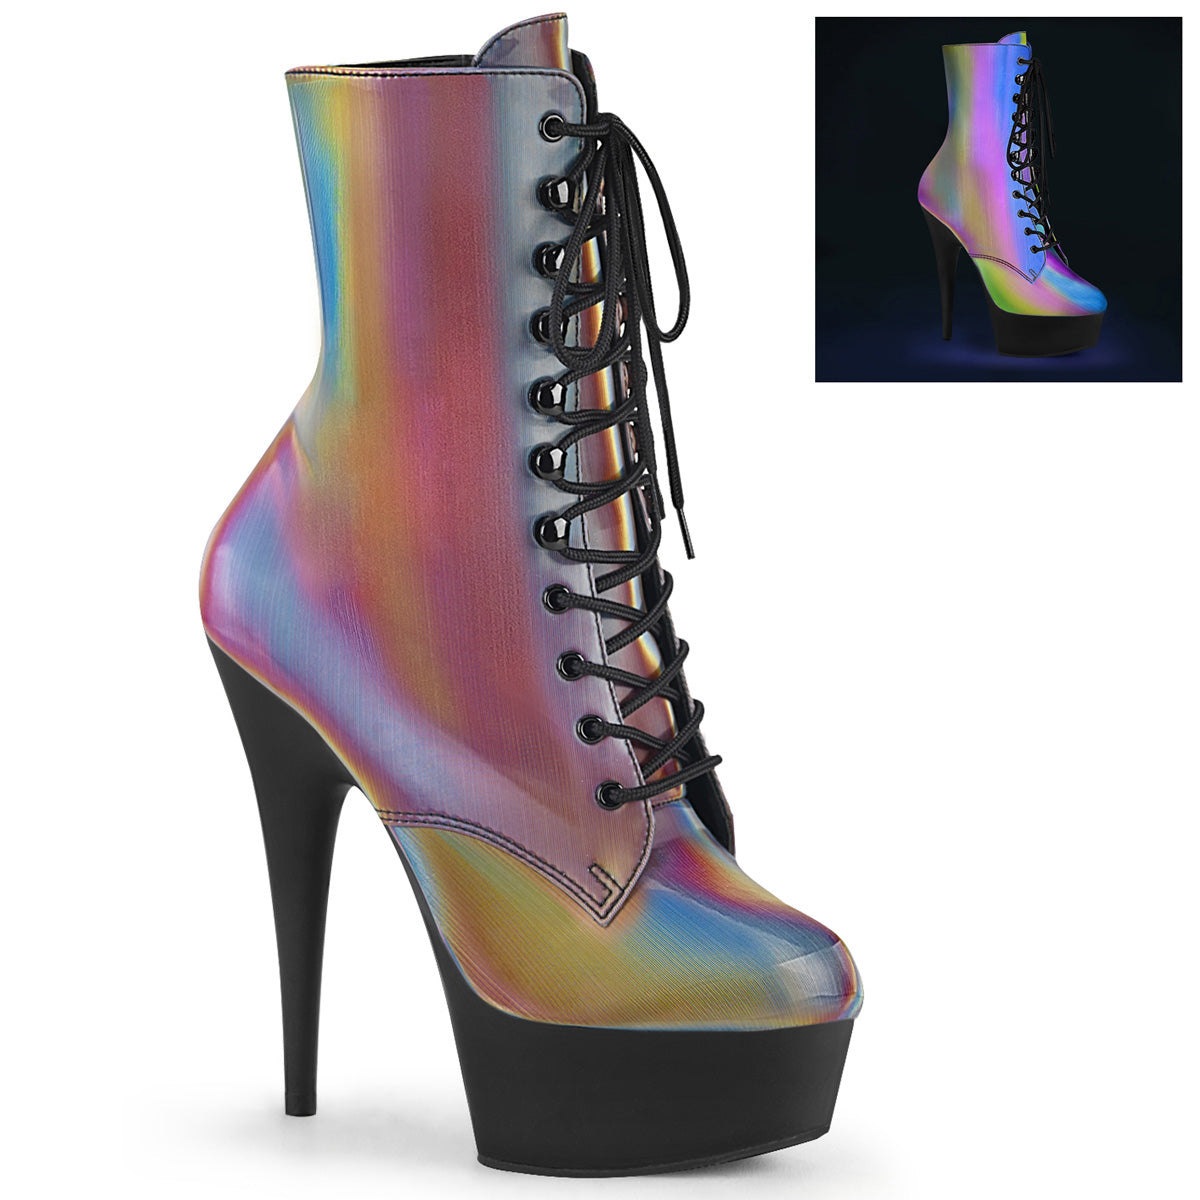 Pleaser DELIGHT-1020REFL Rainbow Reflective 6 Inch (152mm) Heel, 1 3/4 Inch (45mm) Platform Lace-Up Front Ankle Boot With Reflective Rainbow Effect Upper, Inside Zip Closure